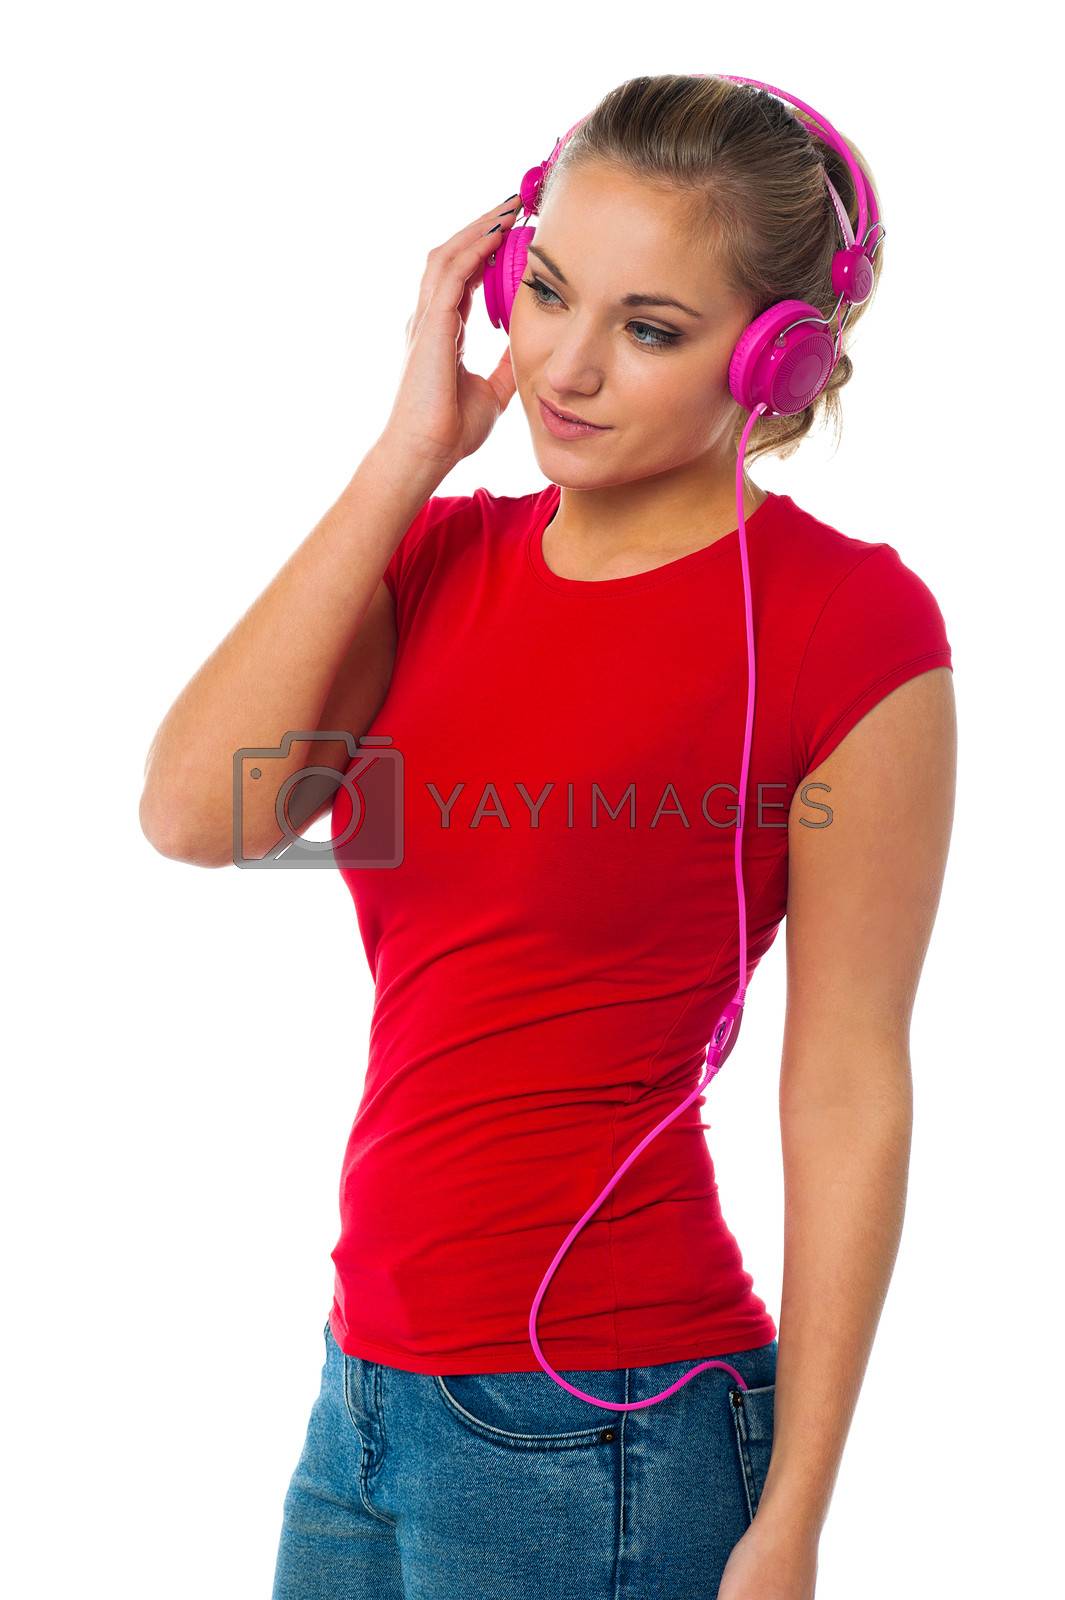 Royalty free image of Girl listening to music through headphones by stockyimages